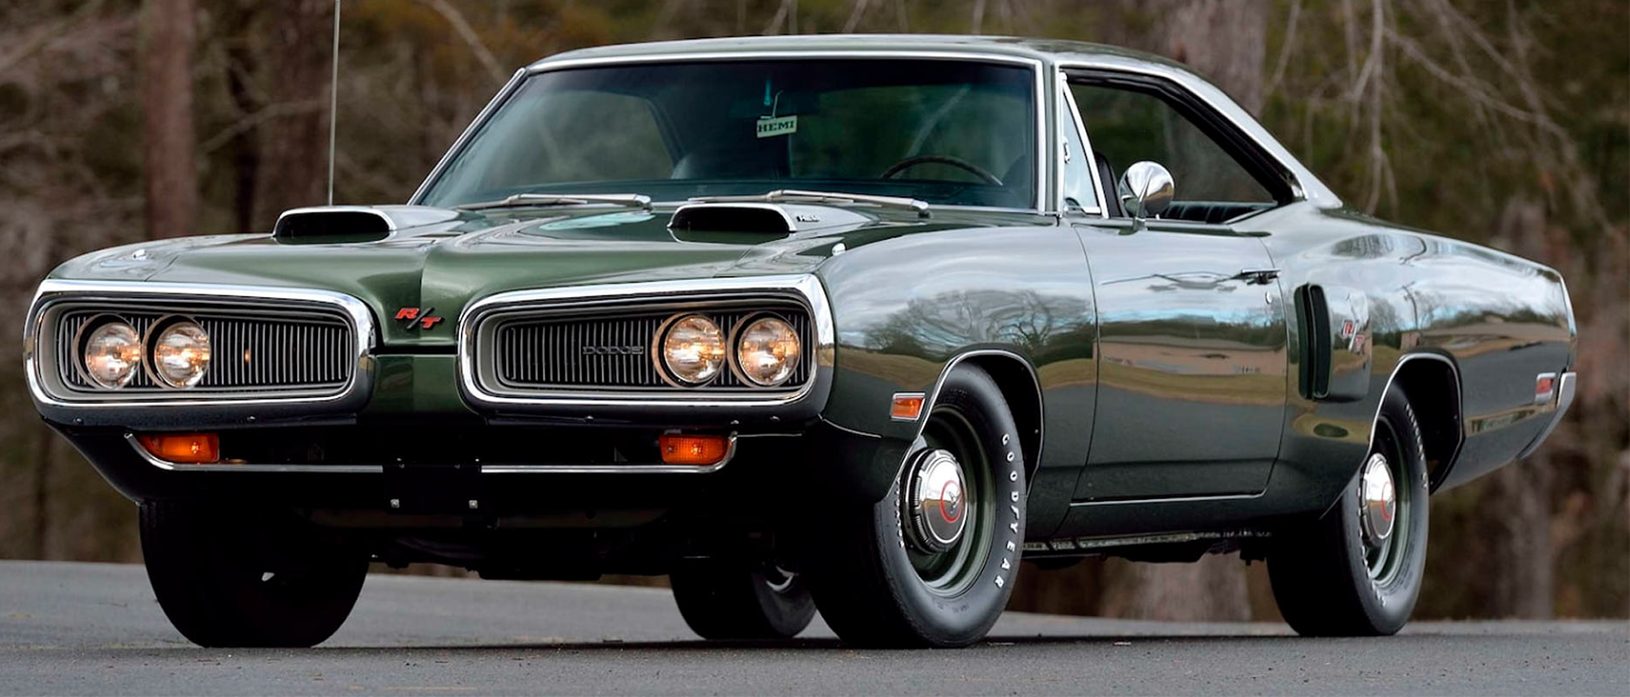 1970 Dodge HEMI<sup>®</sup> Coronet R/T: First of Only Four